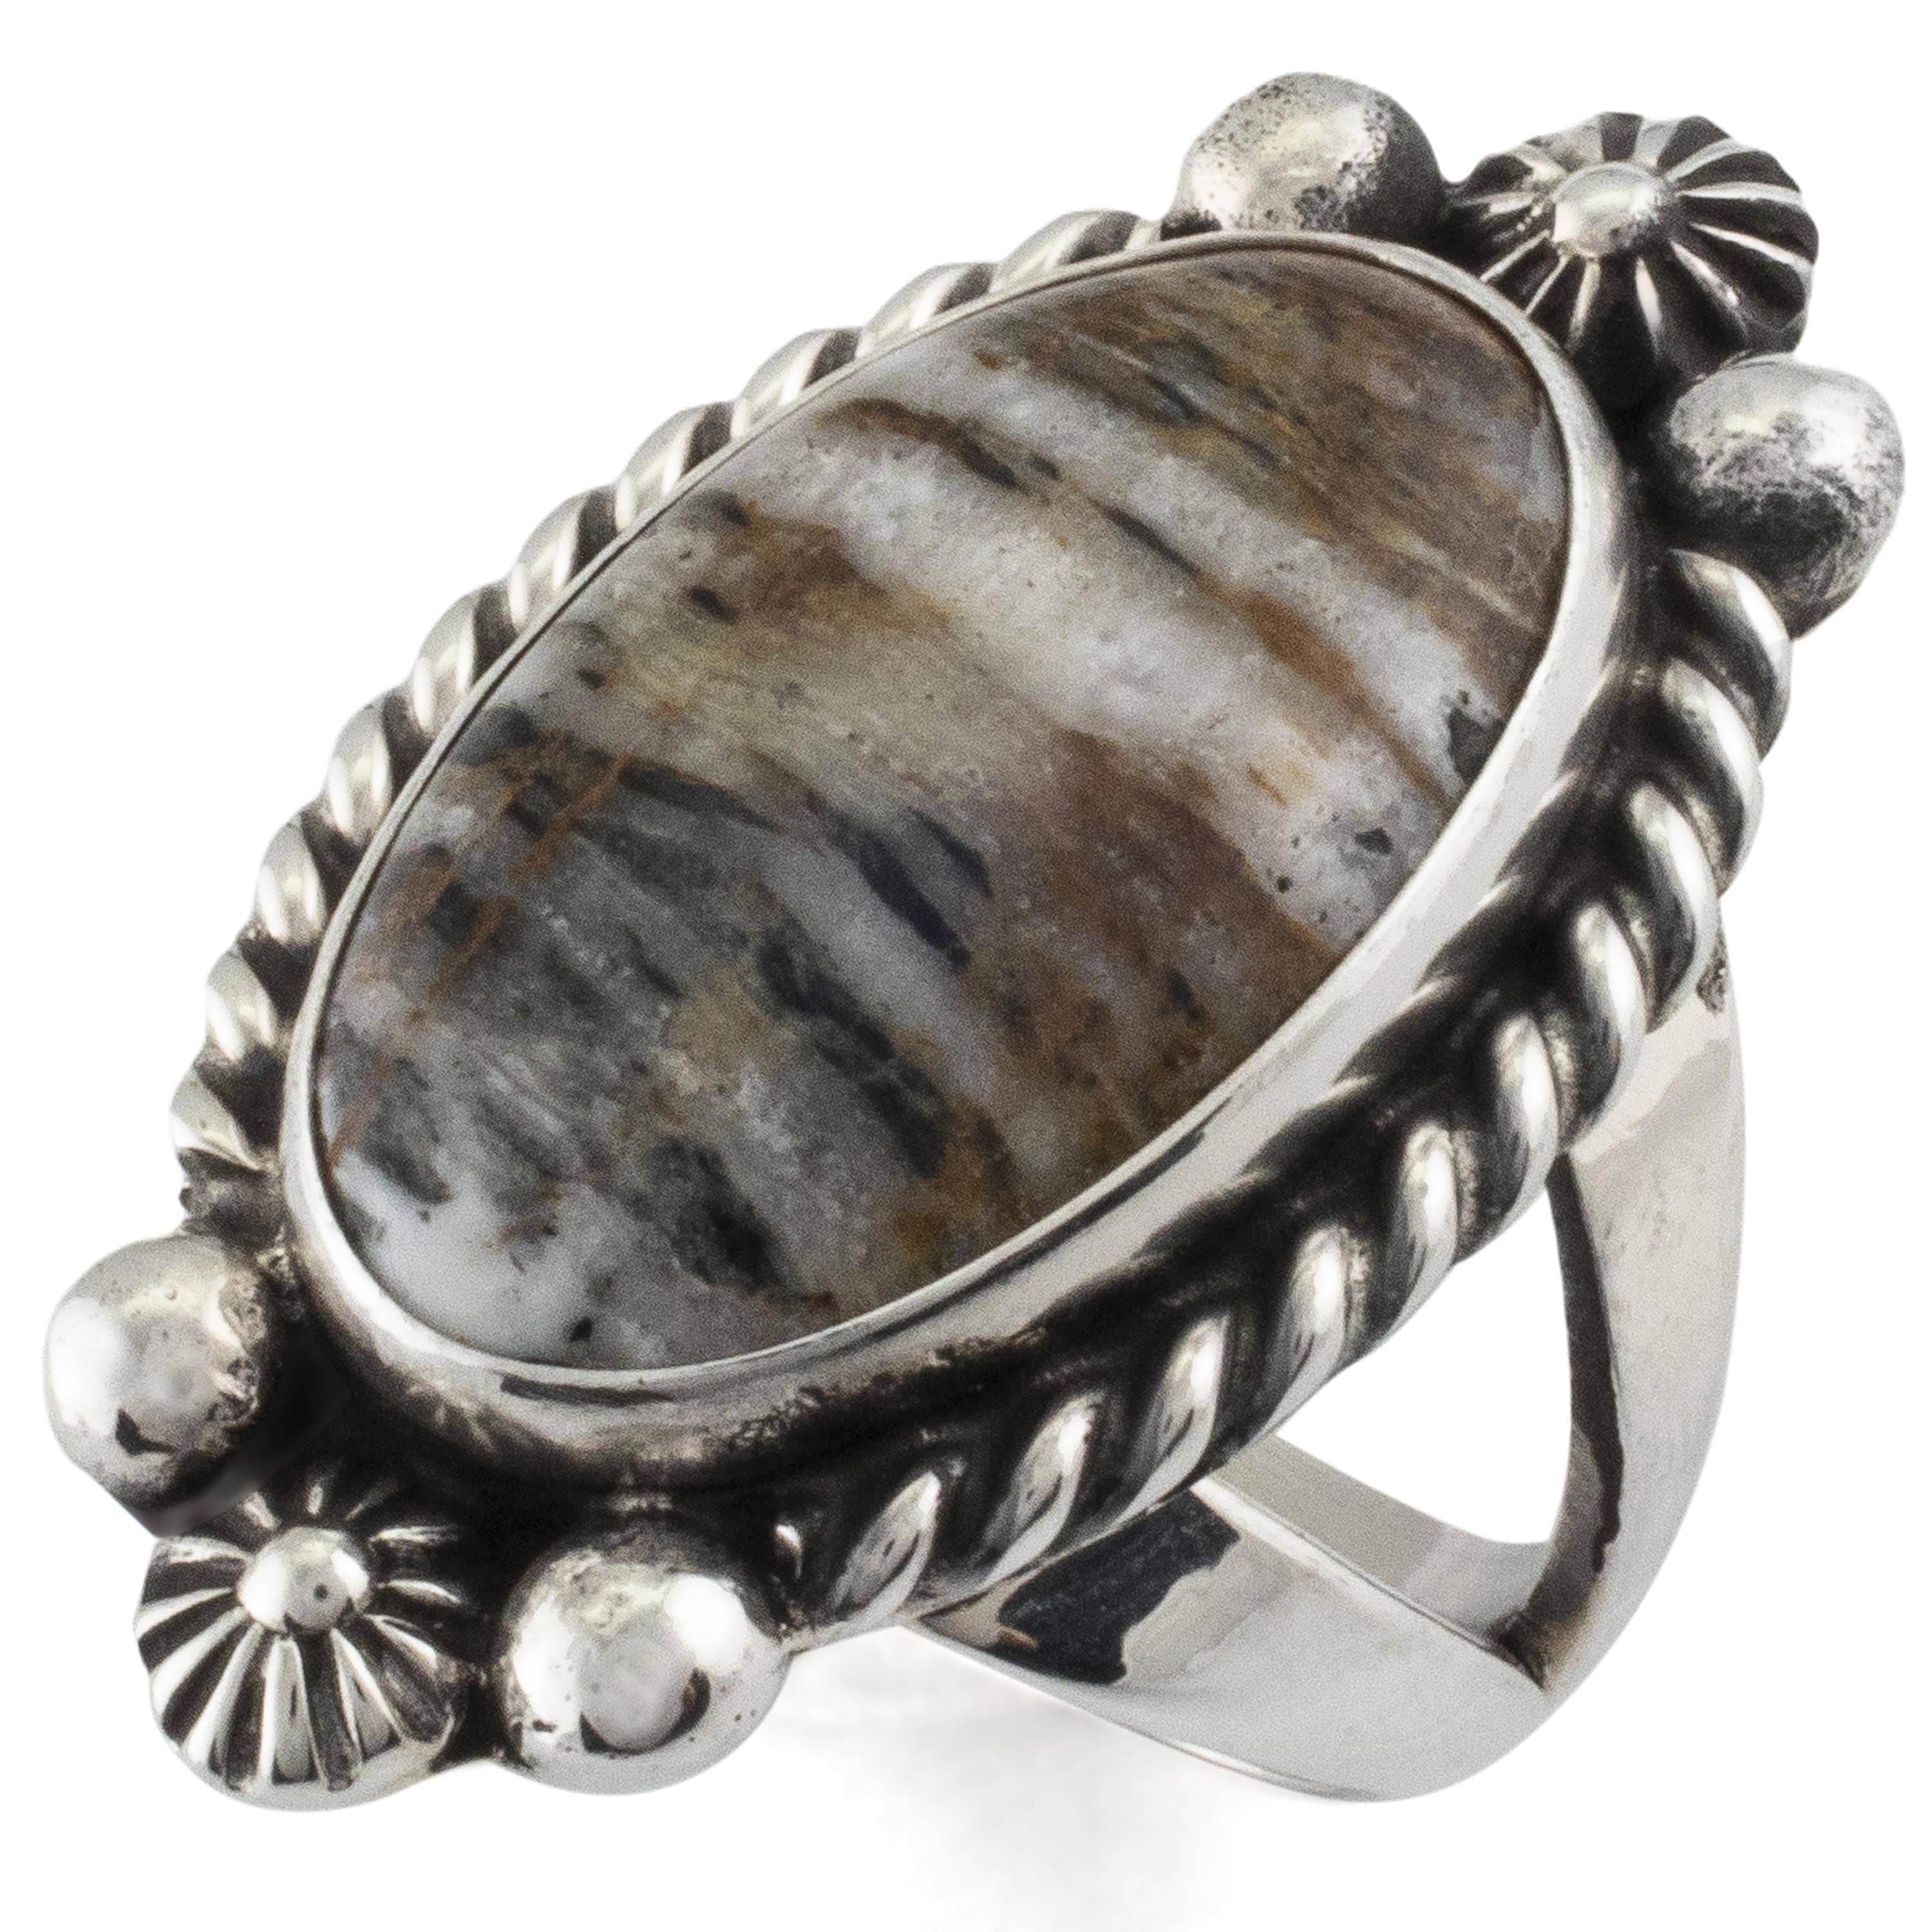 Kalifano Native American Jewelry 8 Eddie Secatero Navajo White Buffalo Turquoise USA Native American Made 925 Sterling Silver Ring NAR800.028.8